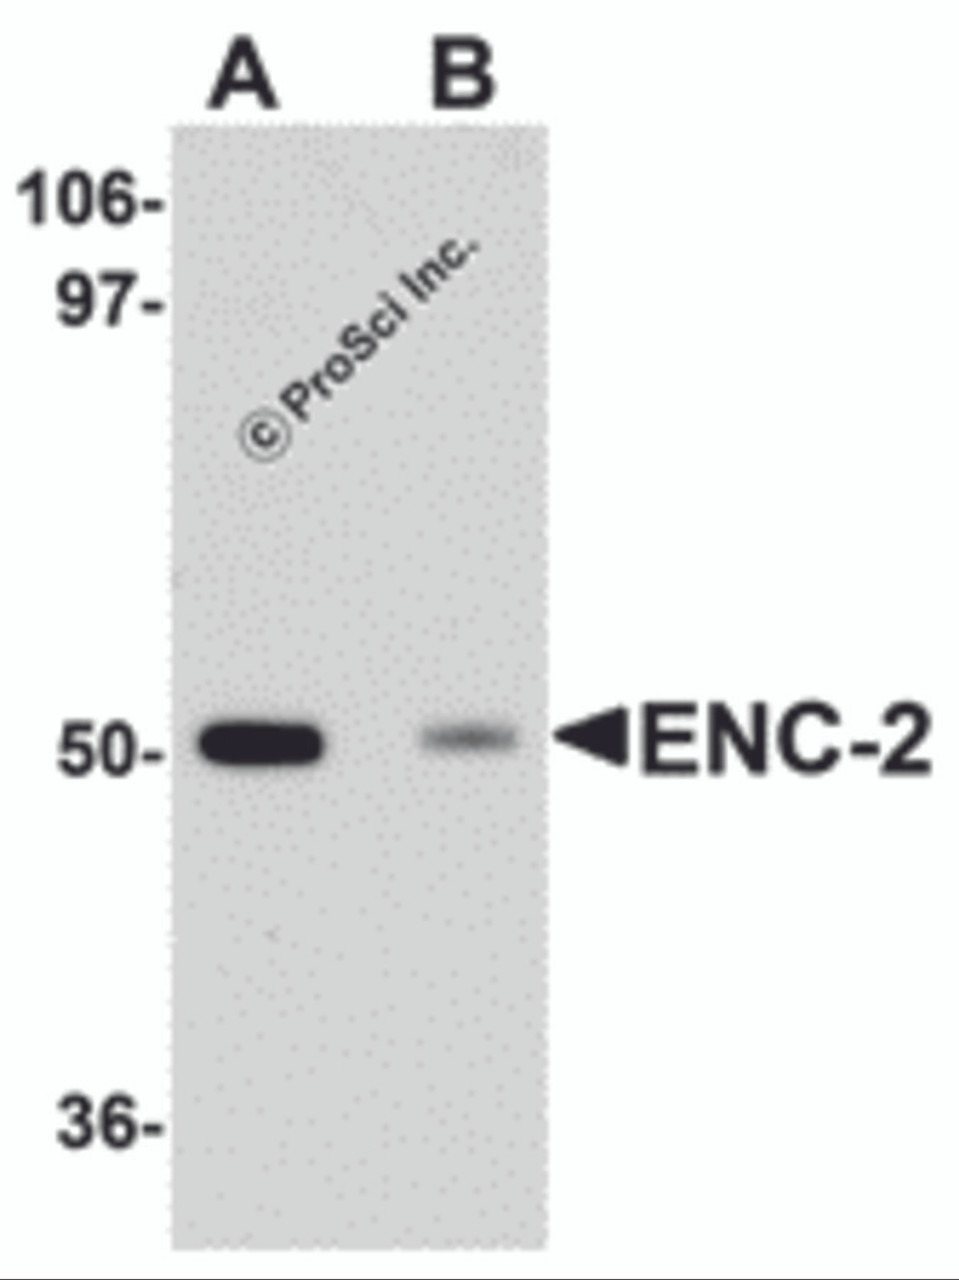 Western blot analysis of ENC-2 in Jurkat cell lysate with ENC-2 antibody at 1 &#956;g/mL in (A) the absence and (B) the presence of blocking peptide.